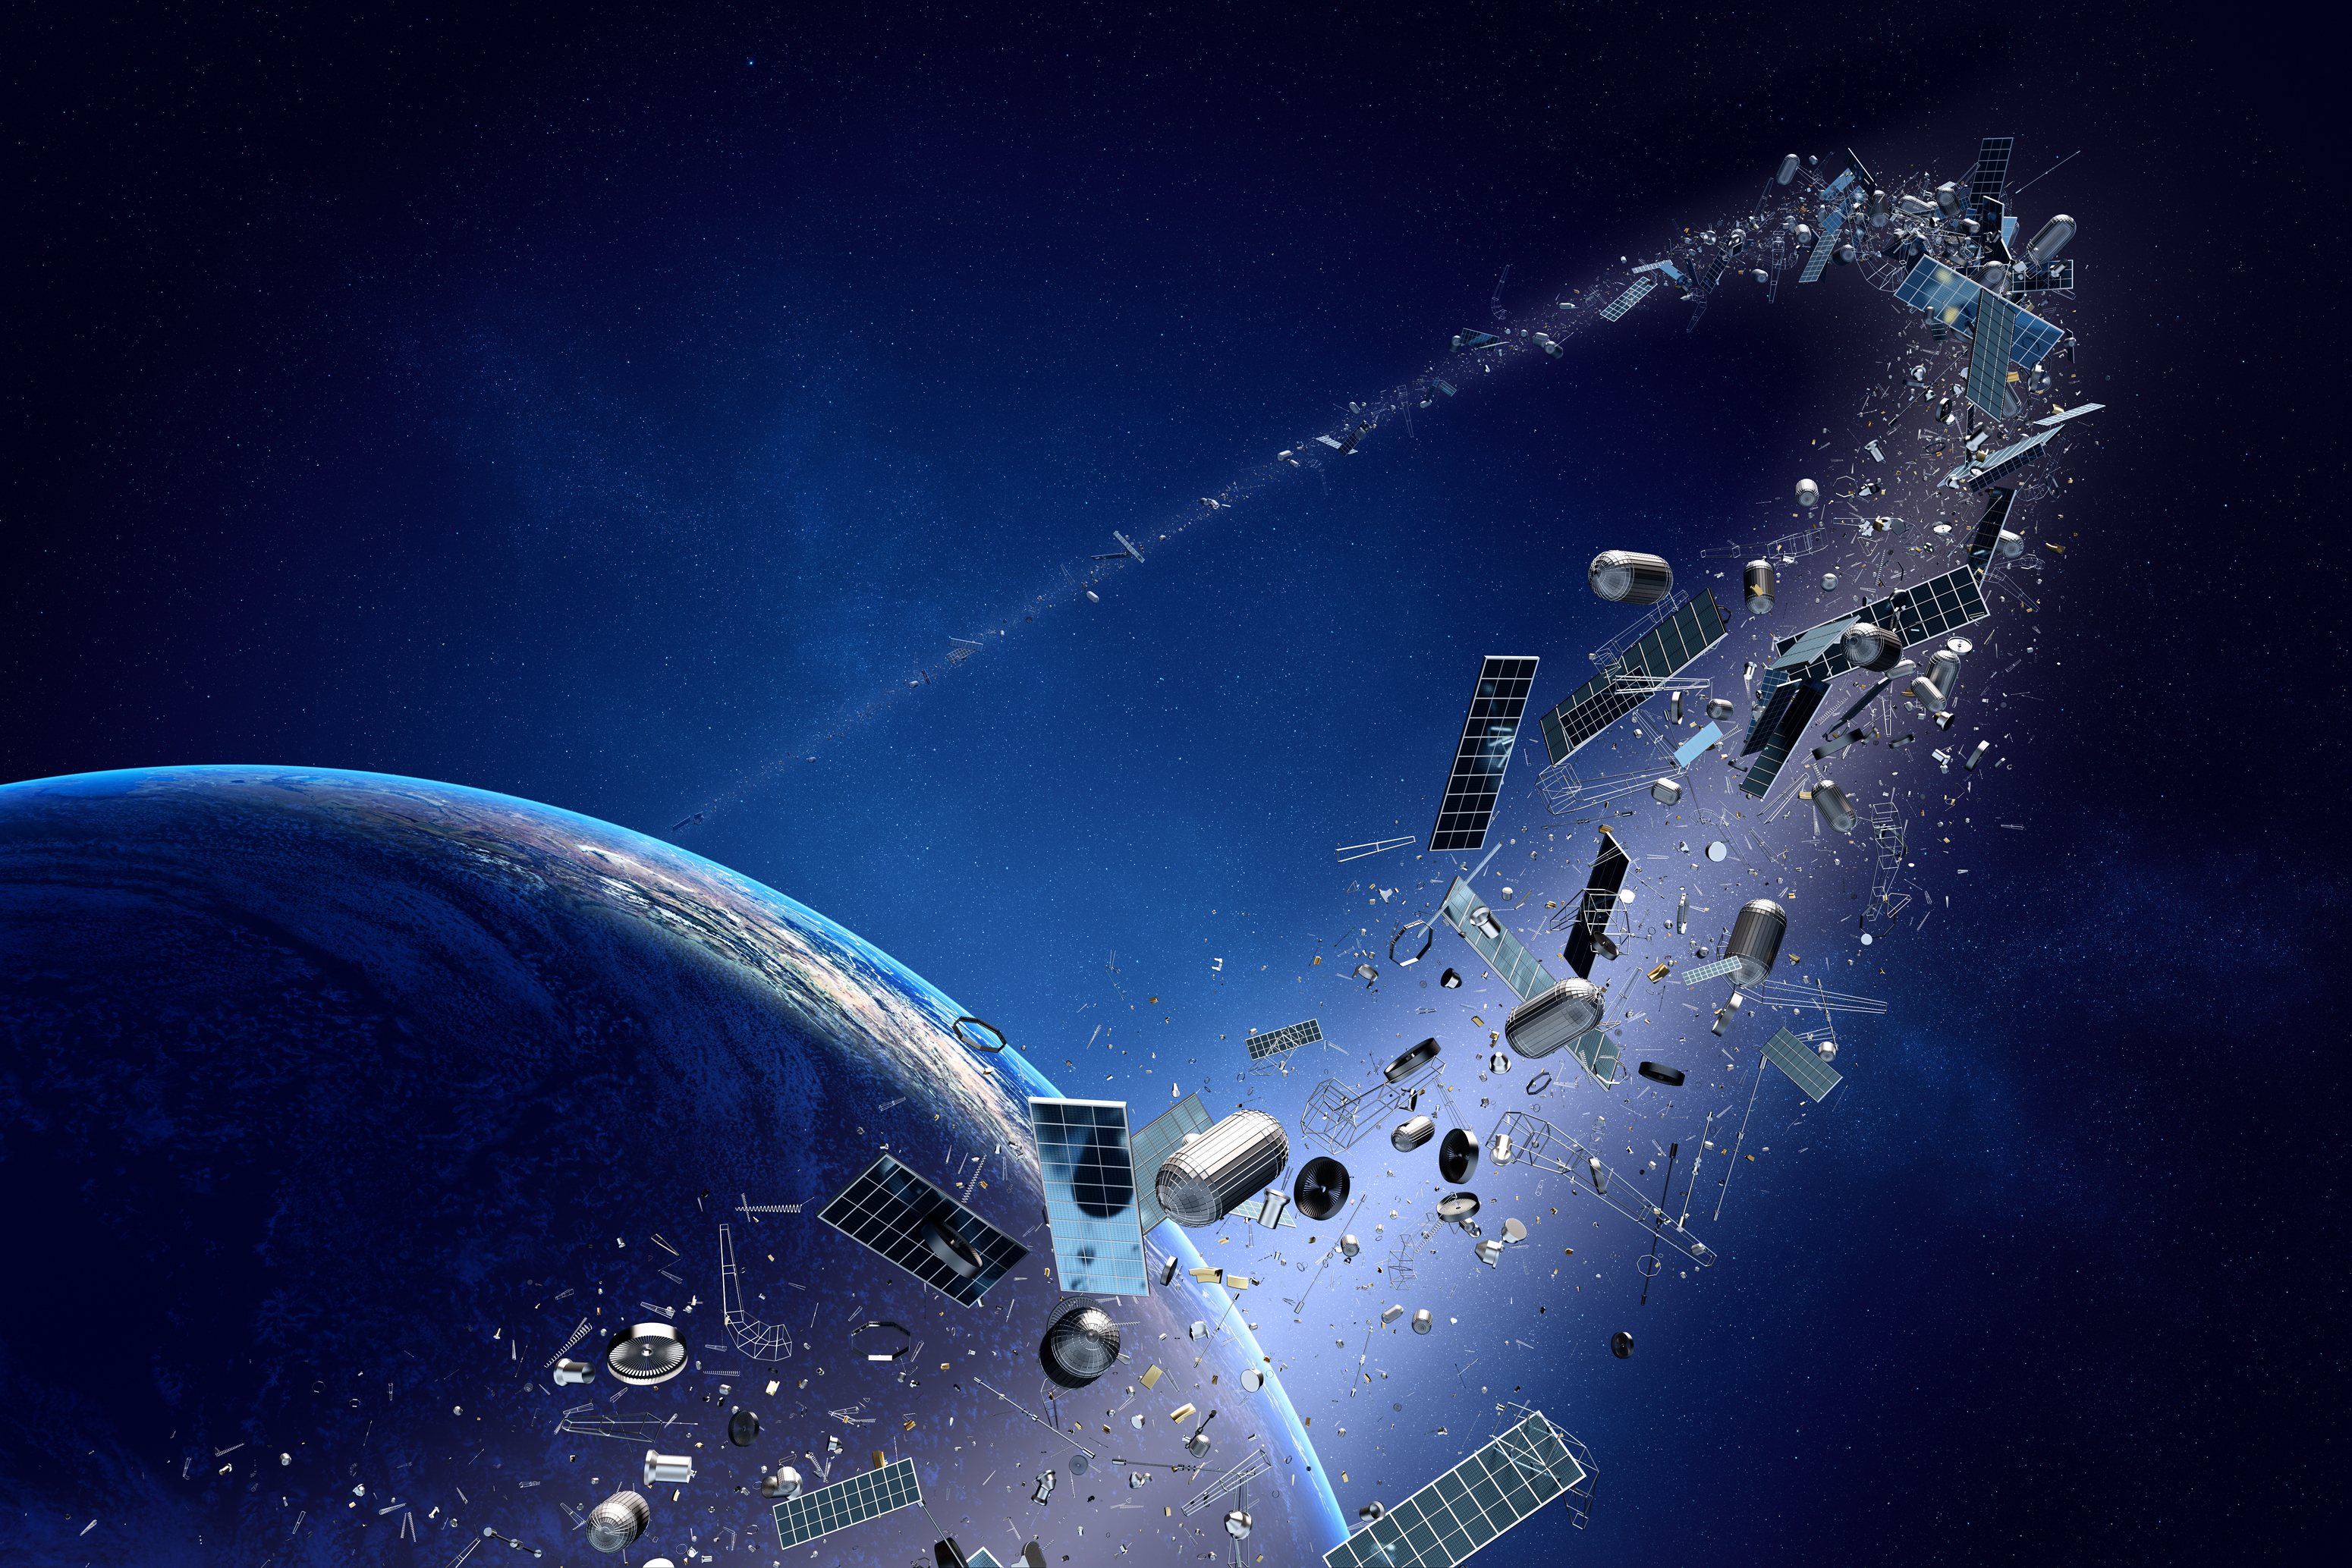 traffic-jam-in-space-garbage-around-earth-and-isro-indian-space-research-organisation-debris